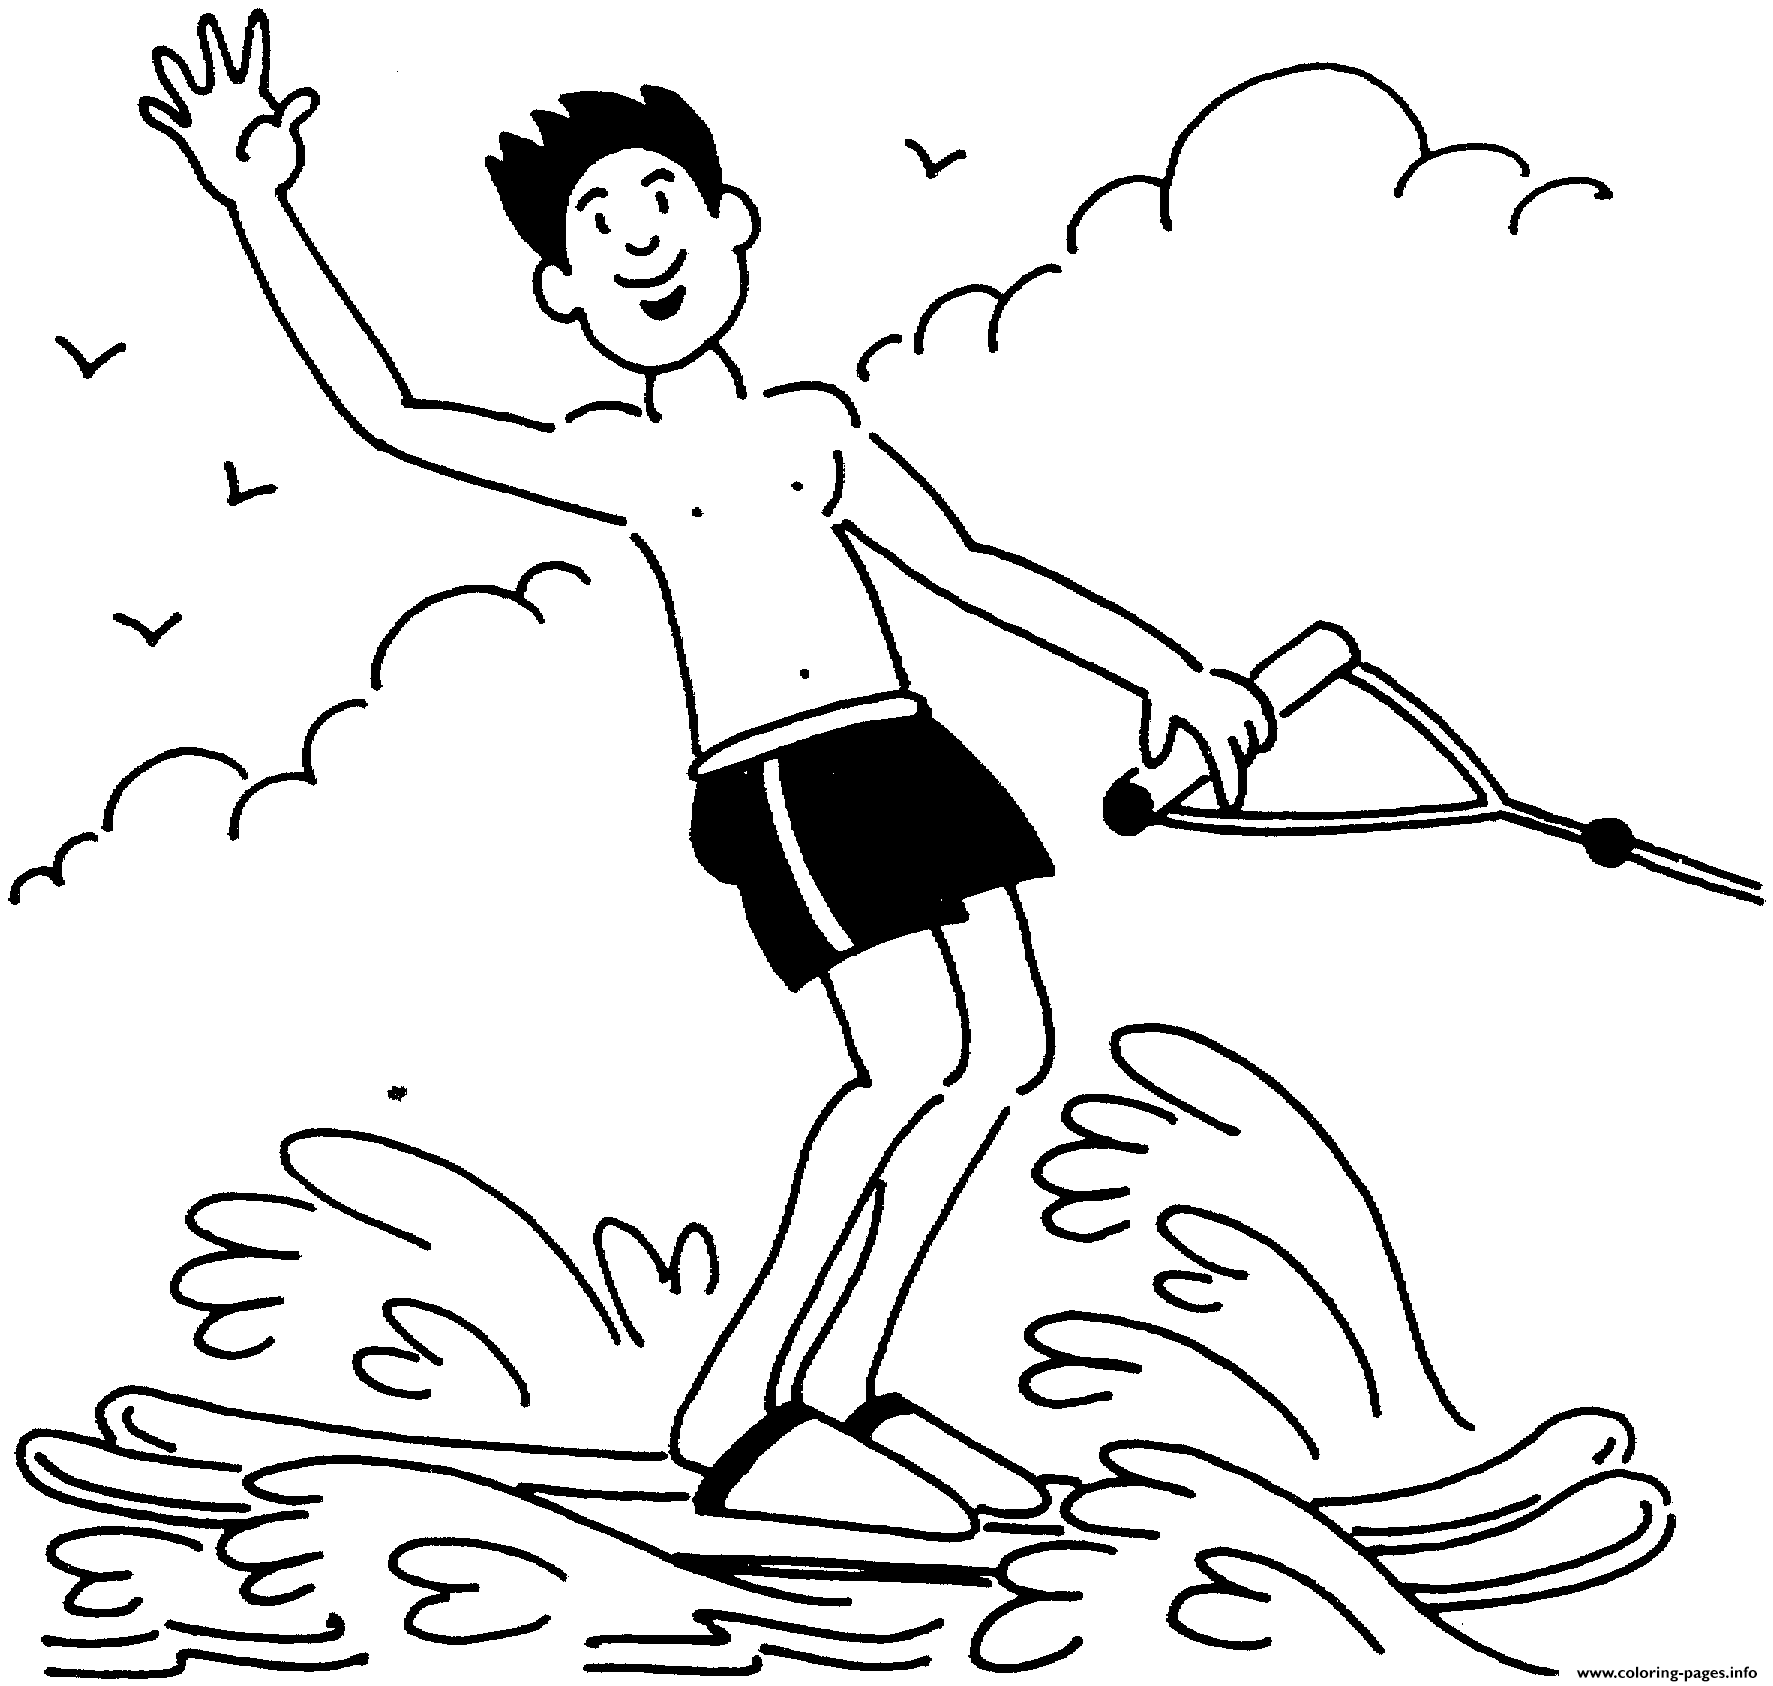 Water Ski Coloring Page3bcf coloring